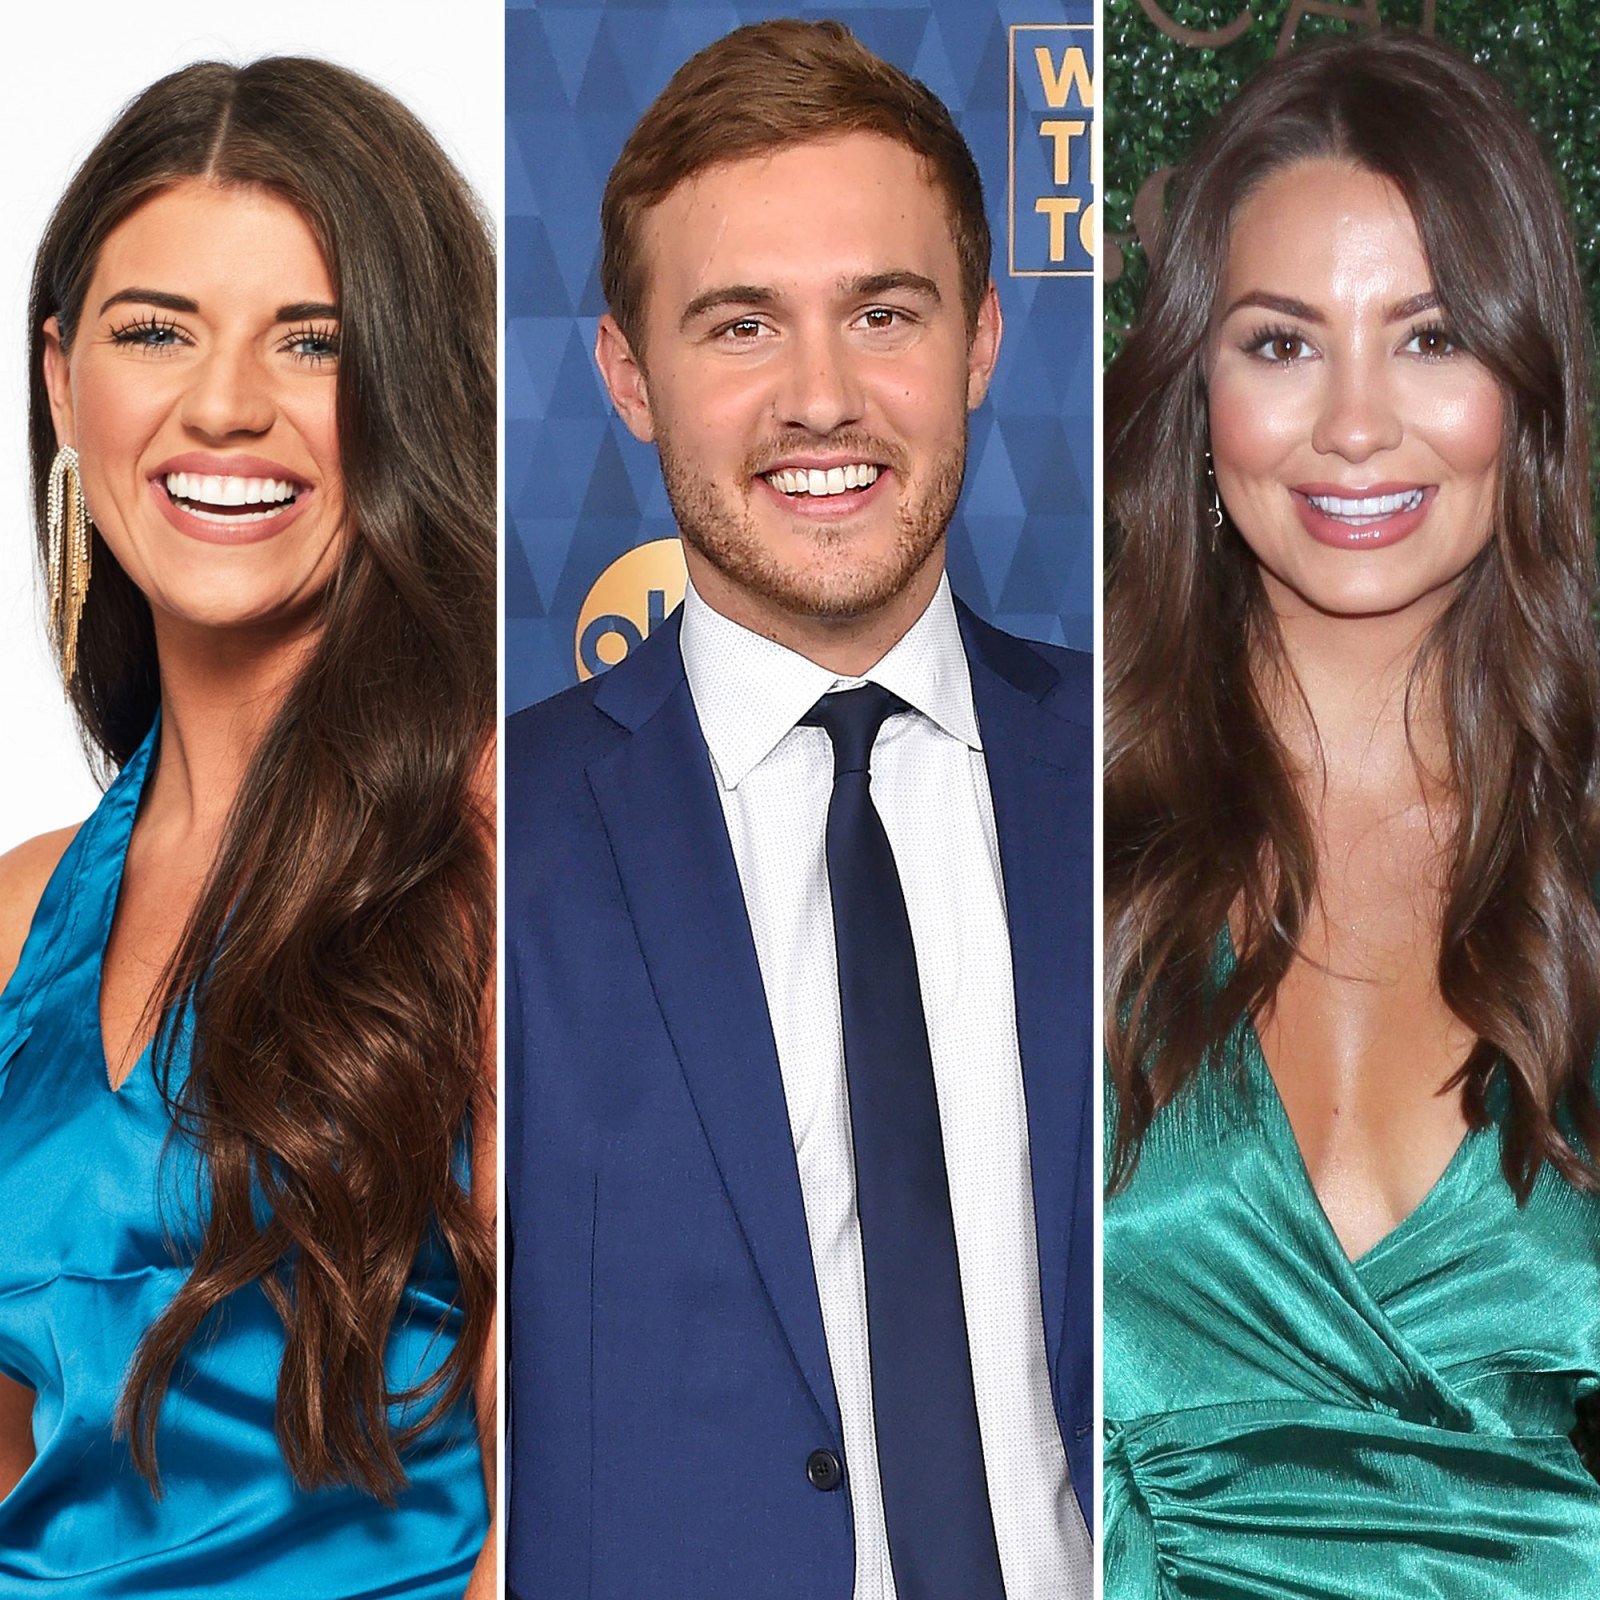 Madison Prewett Peter Weber and Kelley Flanagan All the Drama Between Peter Weber and His Bachelor Cast Since the Finale